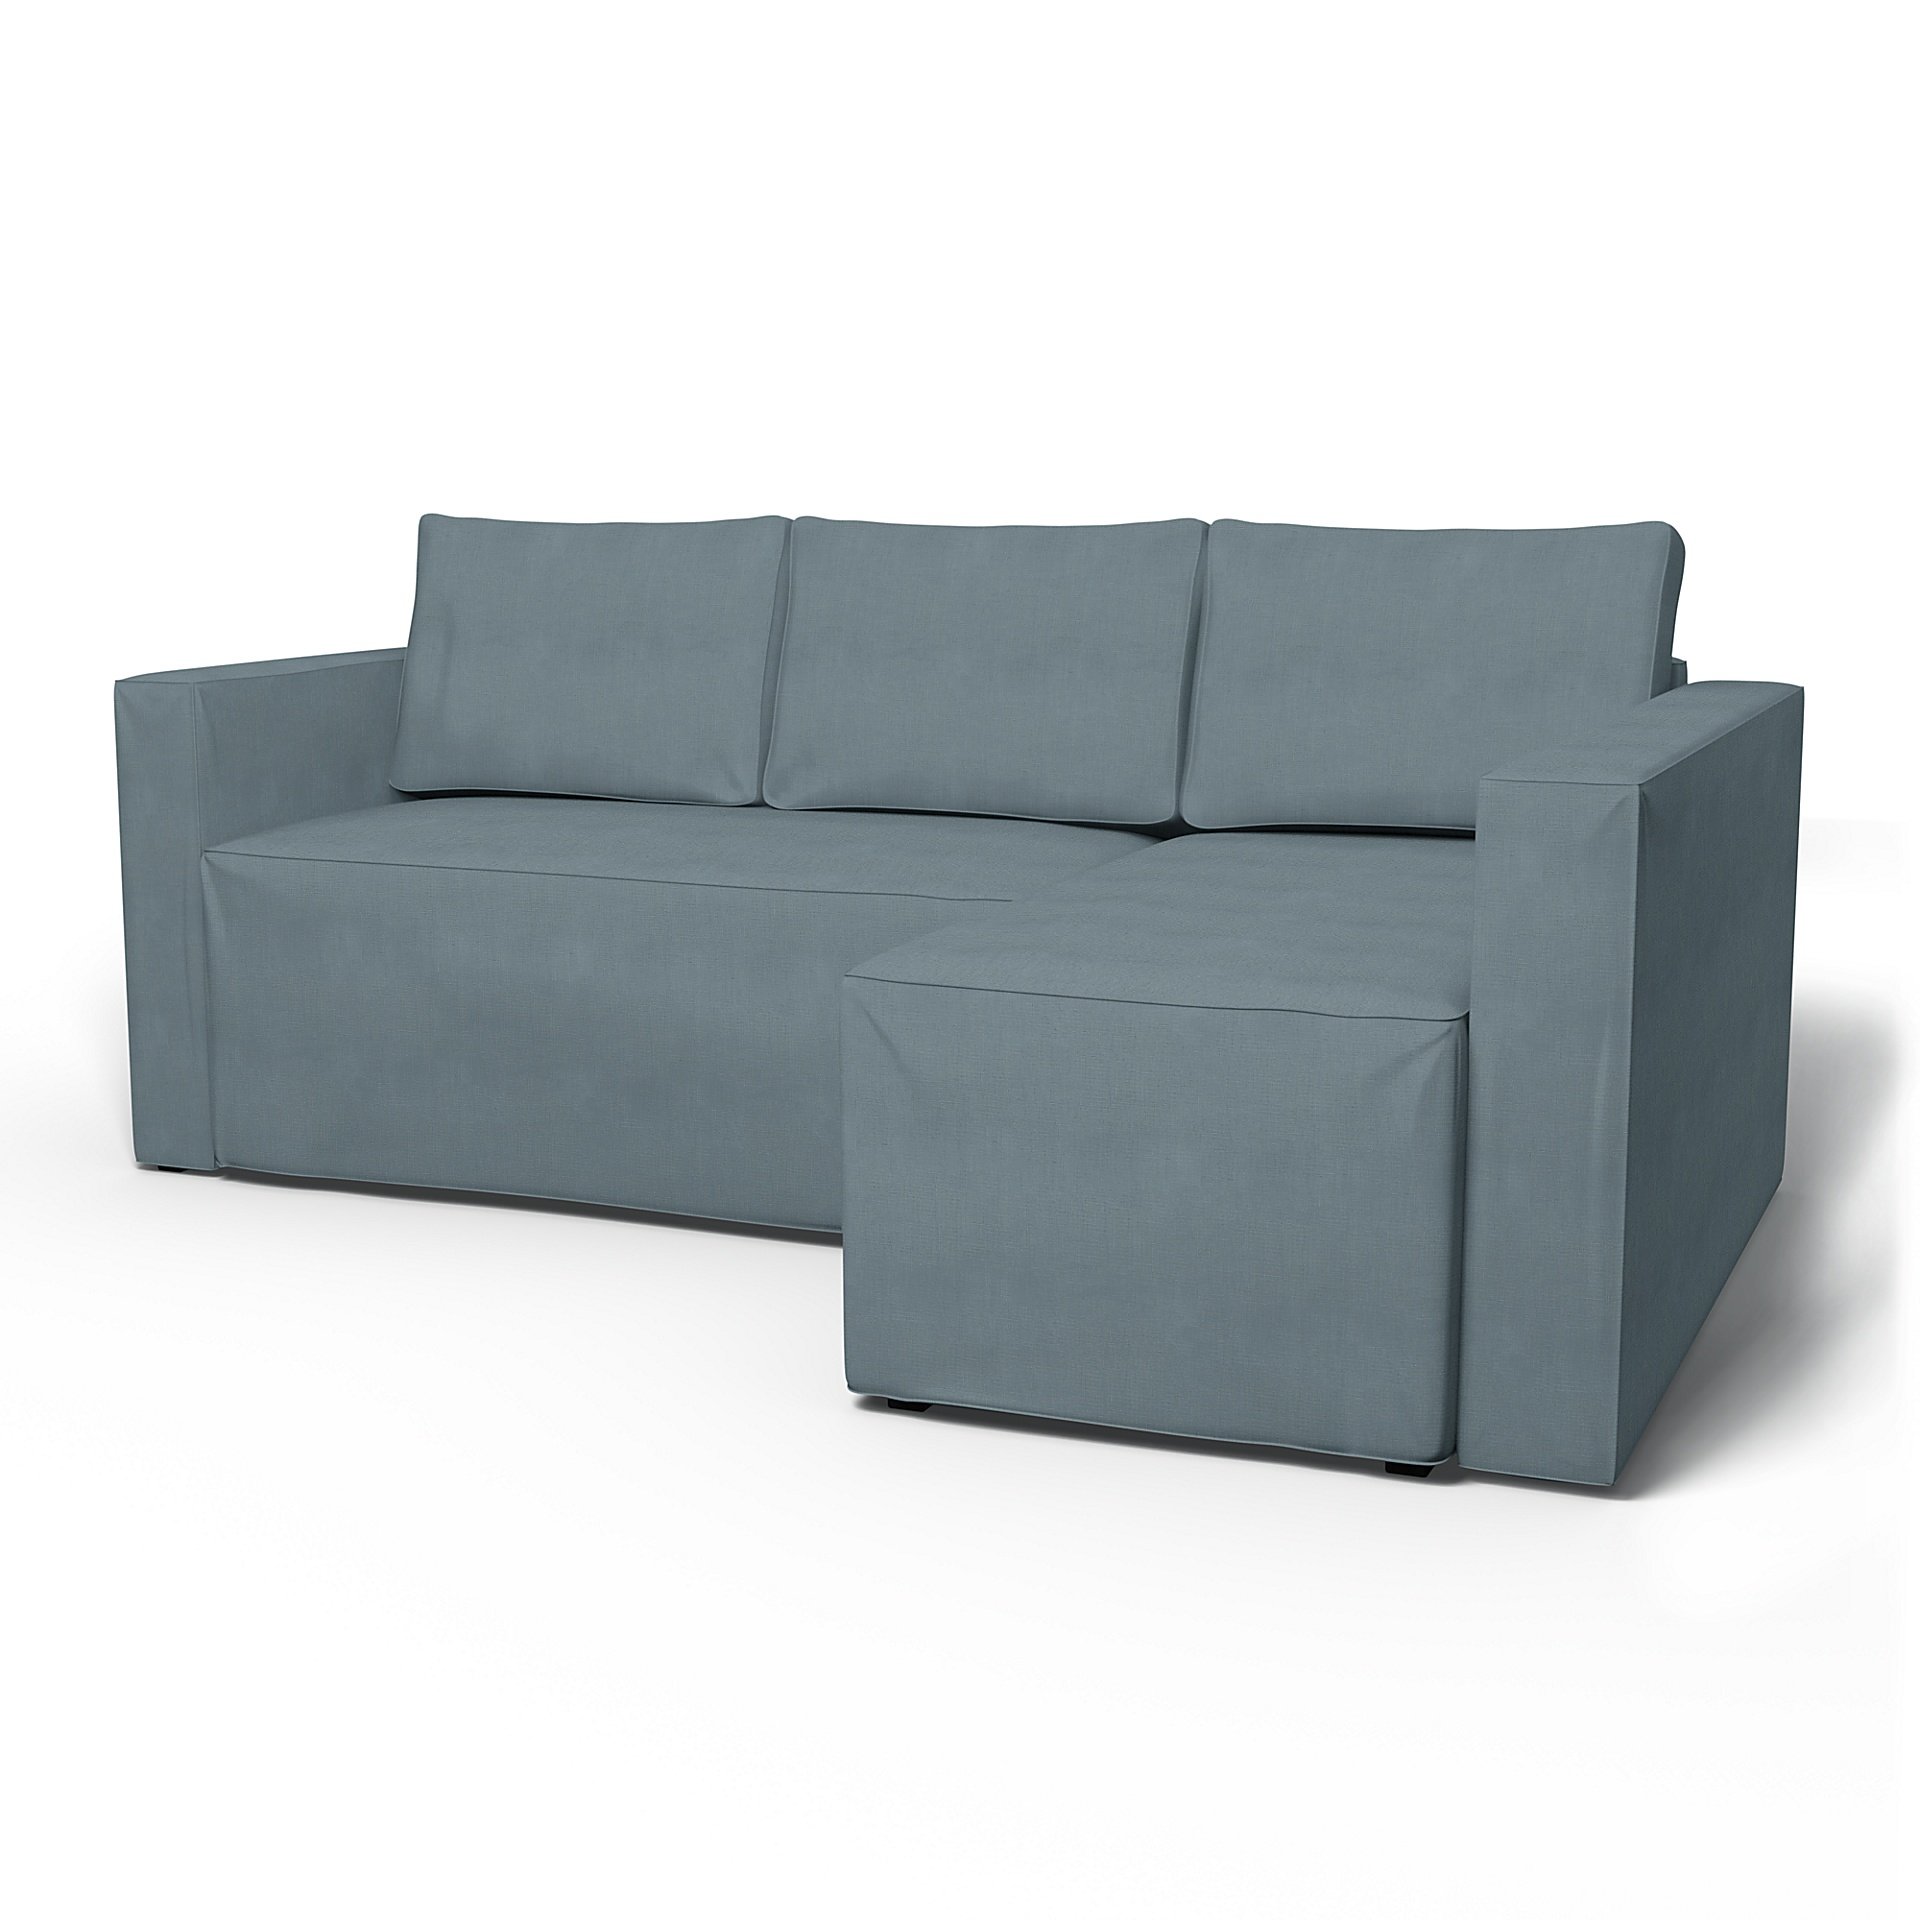 IKEA - Manstad Sofa Bed with Right Chaise Cover, Dusk, Linen - Bemz